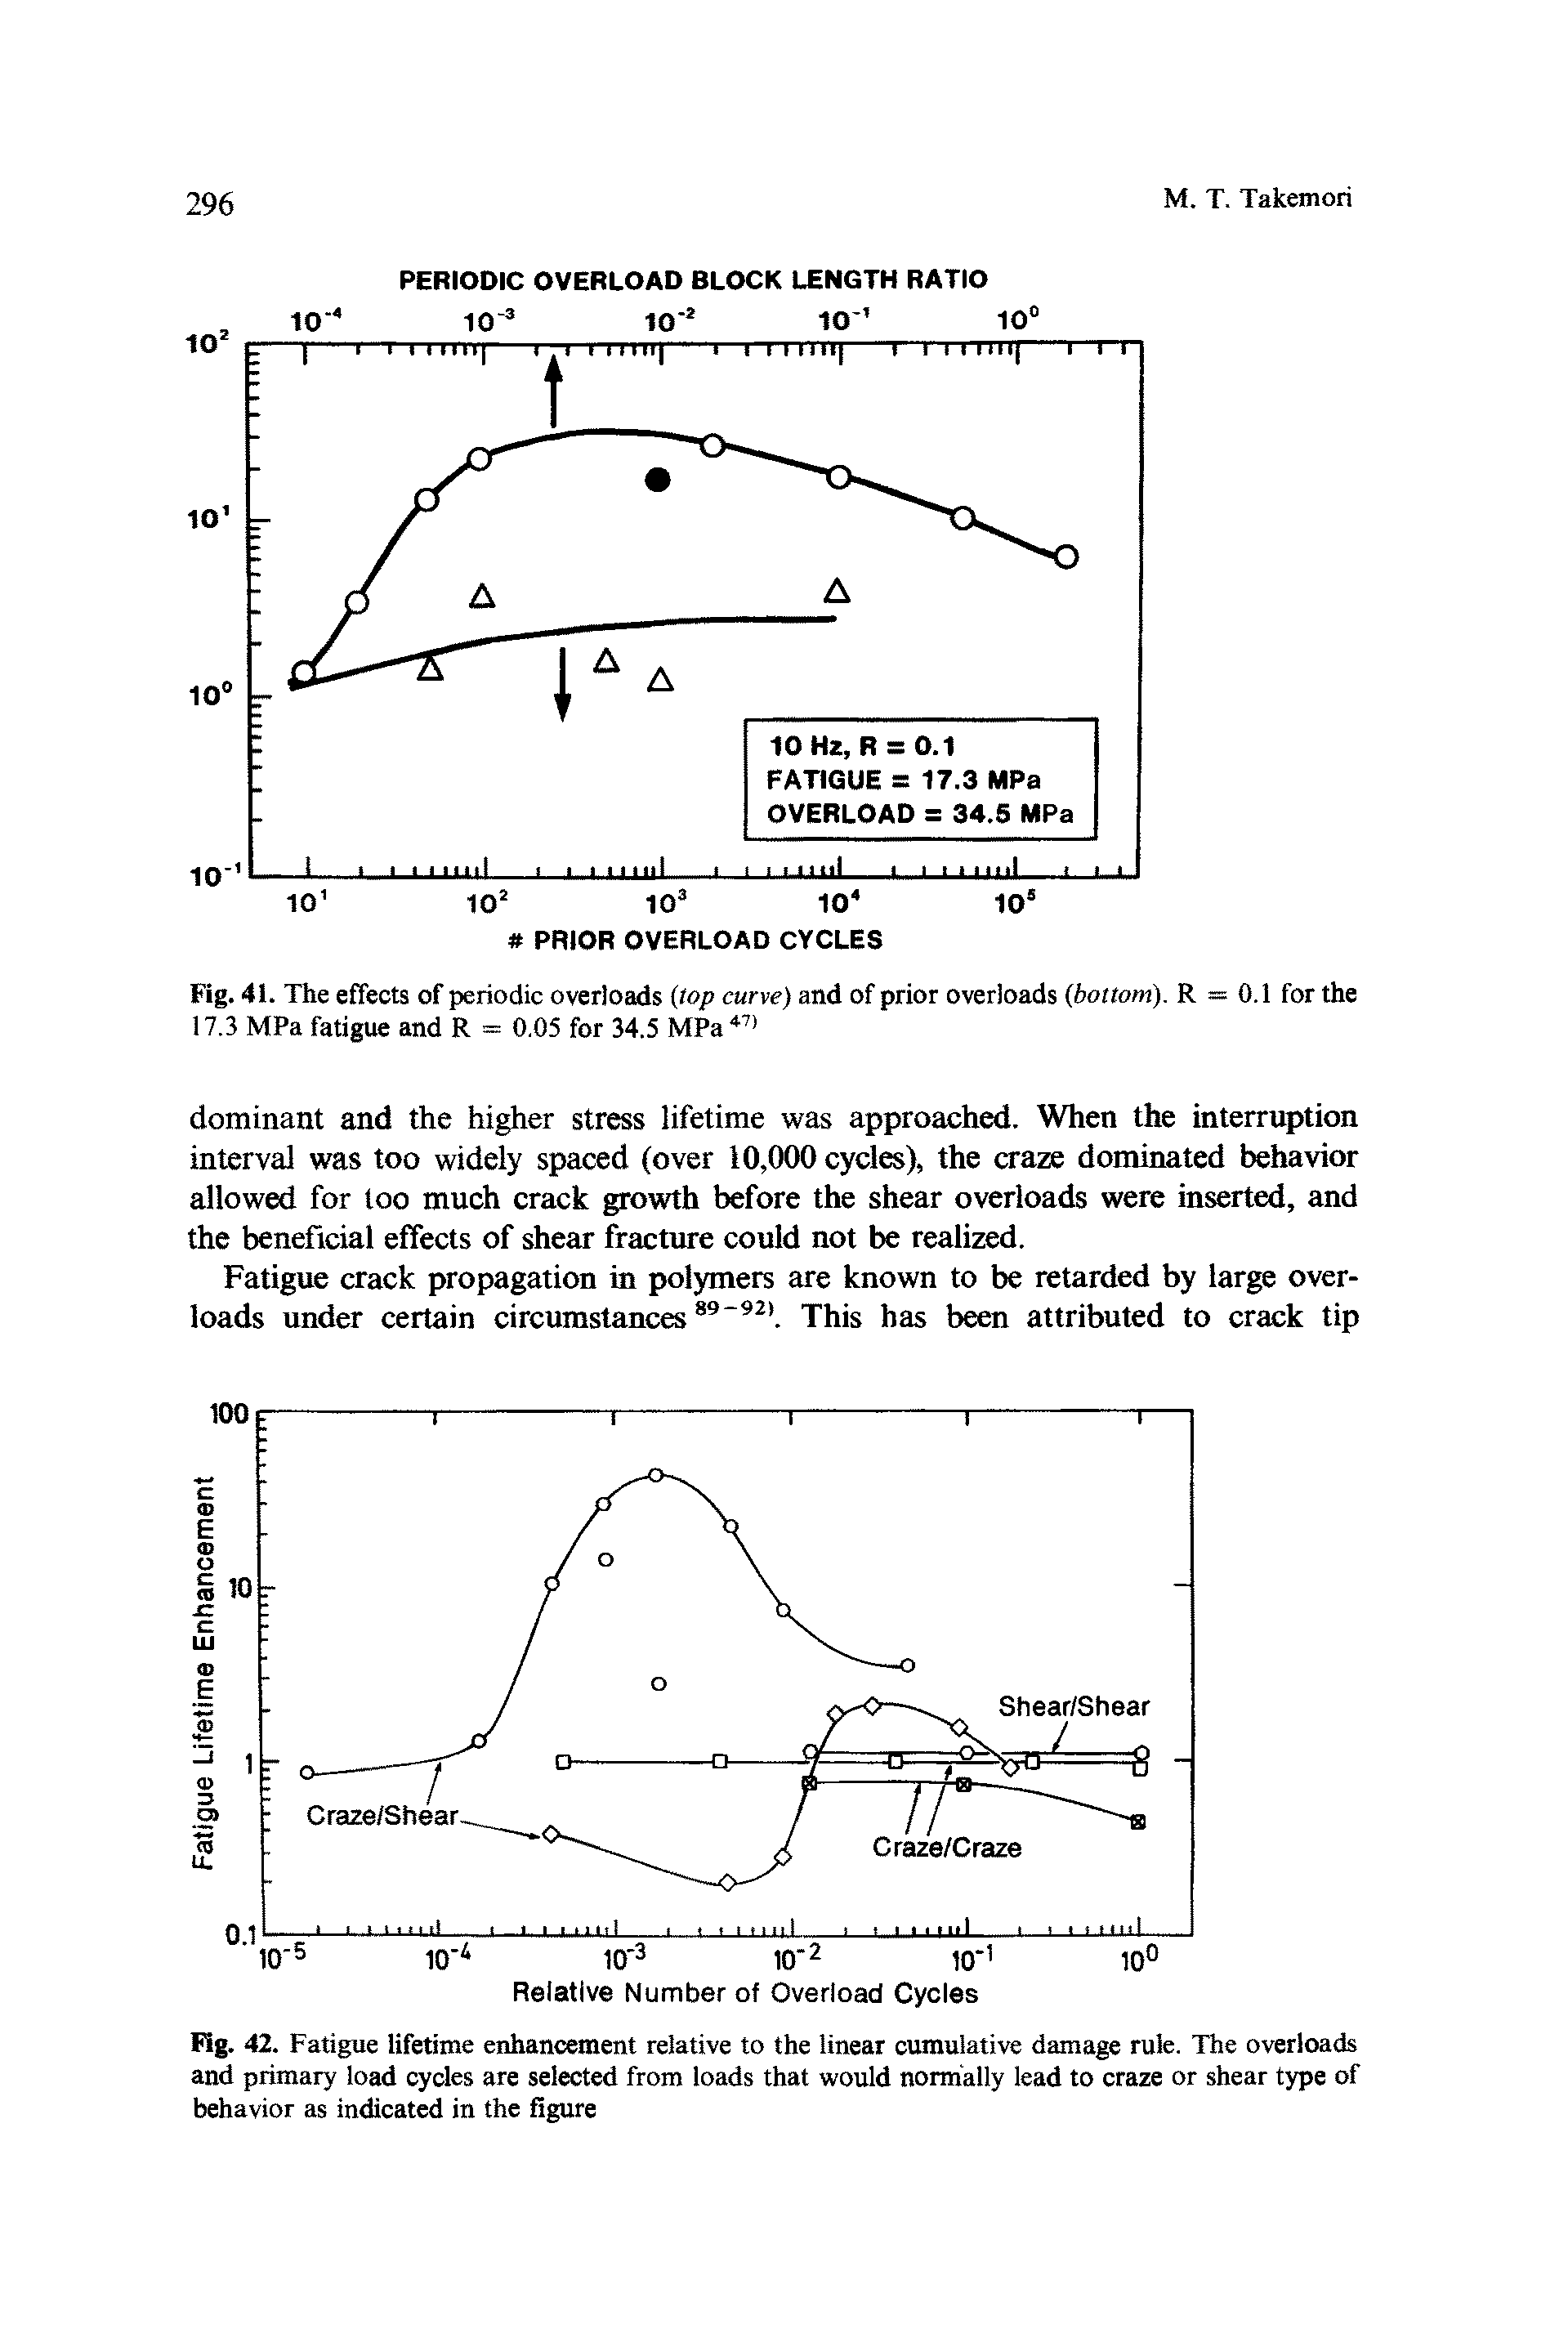 Fig. 42. Fatigue lifetime enhancement relative to the linear cumulative damage rule. The overloads and primary load cycles are selected from loads that would normally lead to craze or shear type of behavior as indicated in the figure...